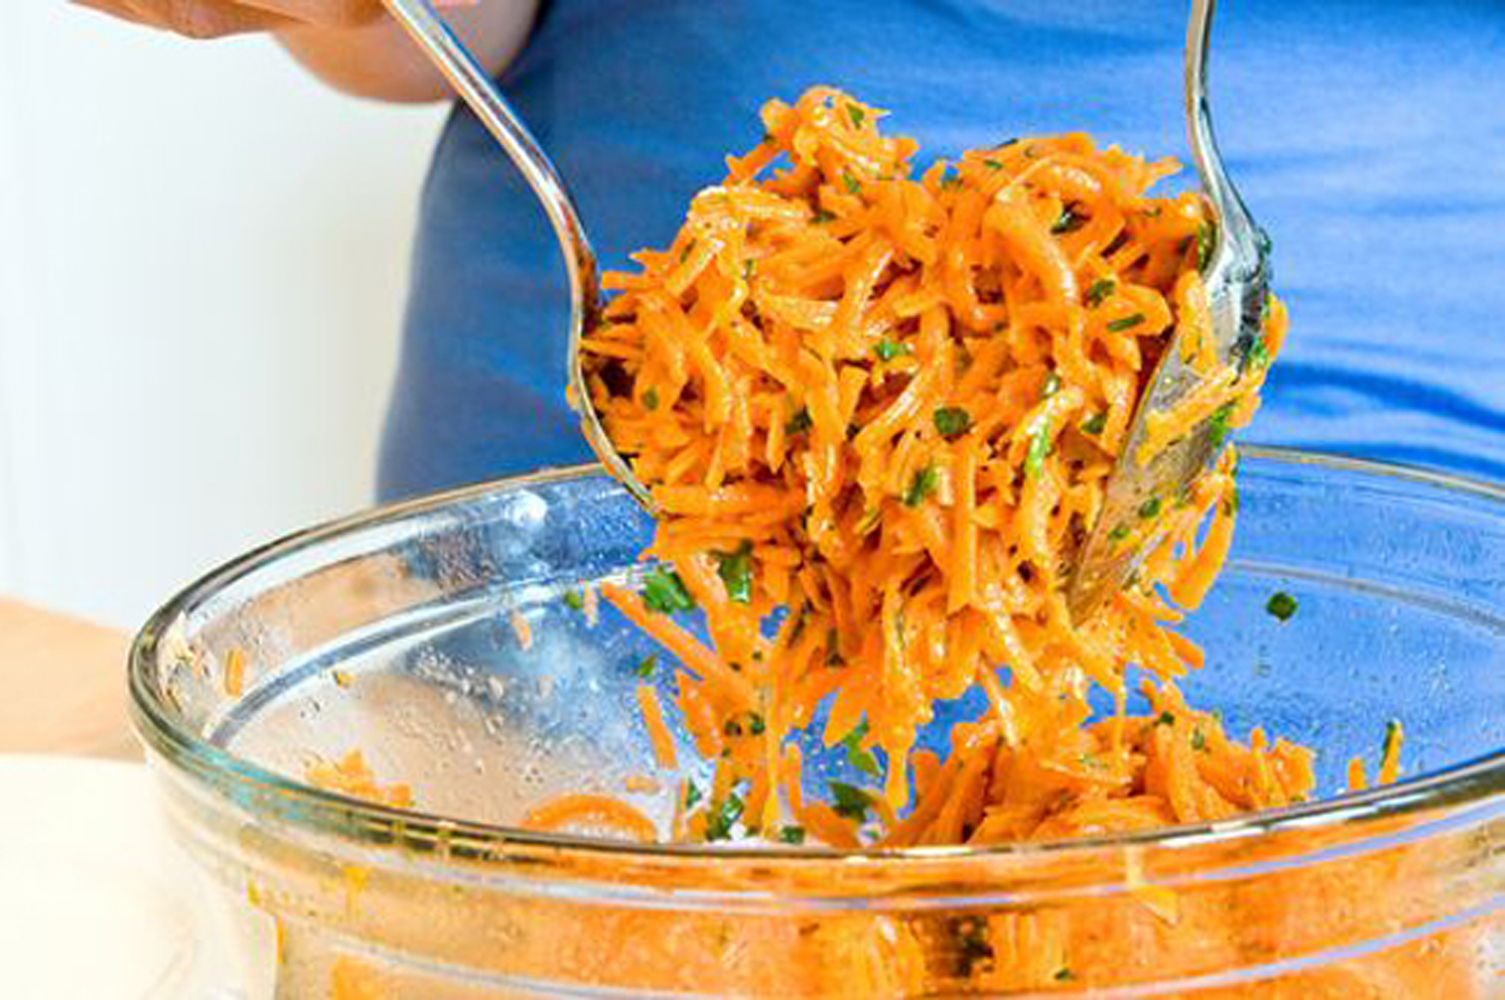 https://www.onceuponachef.com/images/2009/07/French-Grated-Carrot-Salad-1.jpg